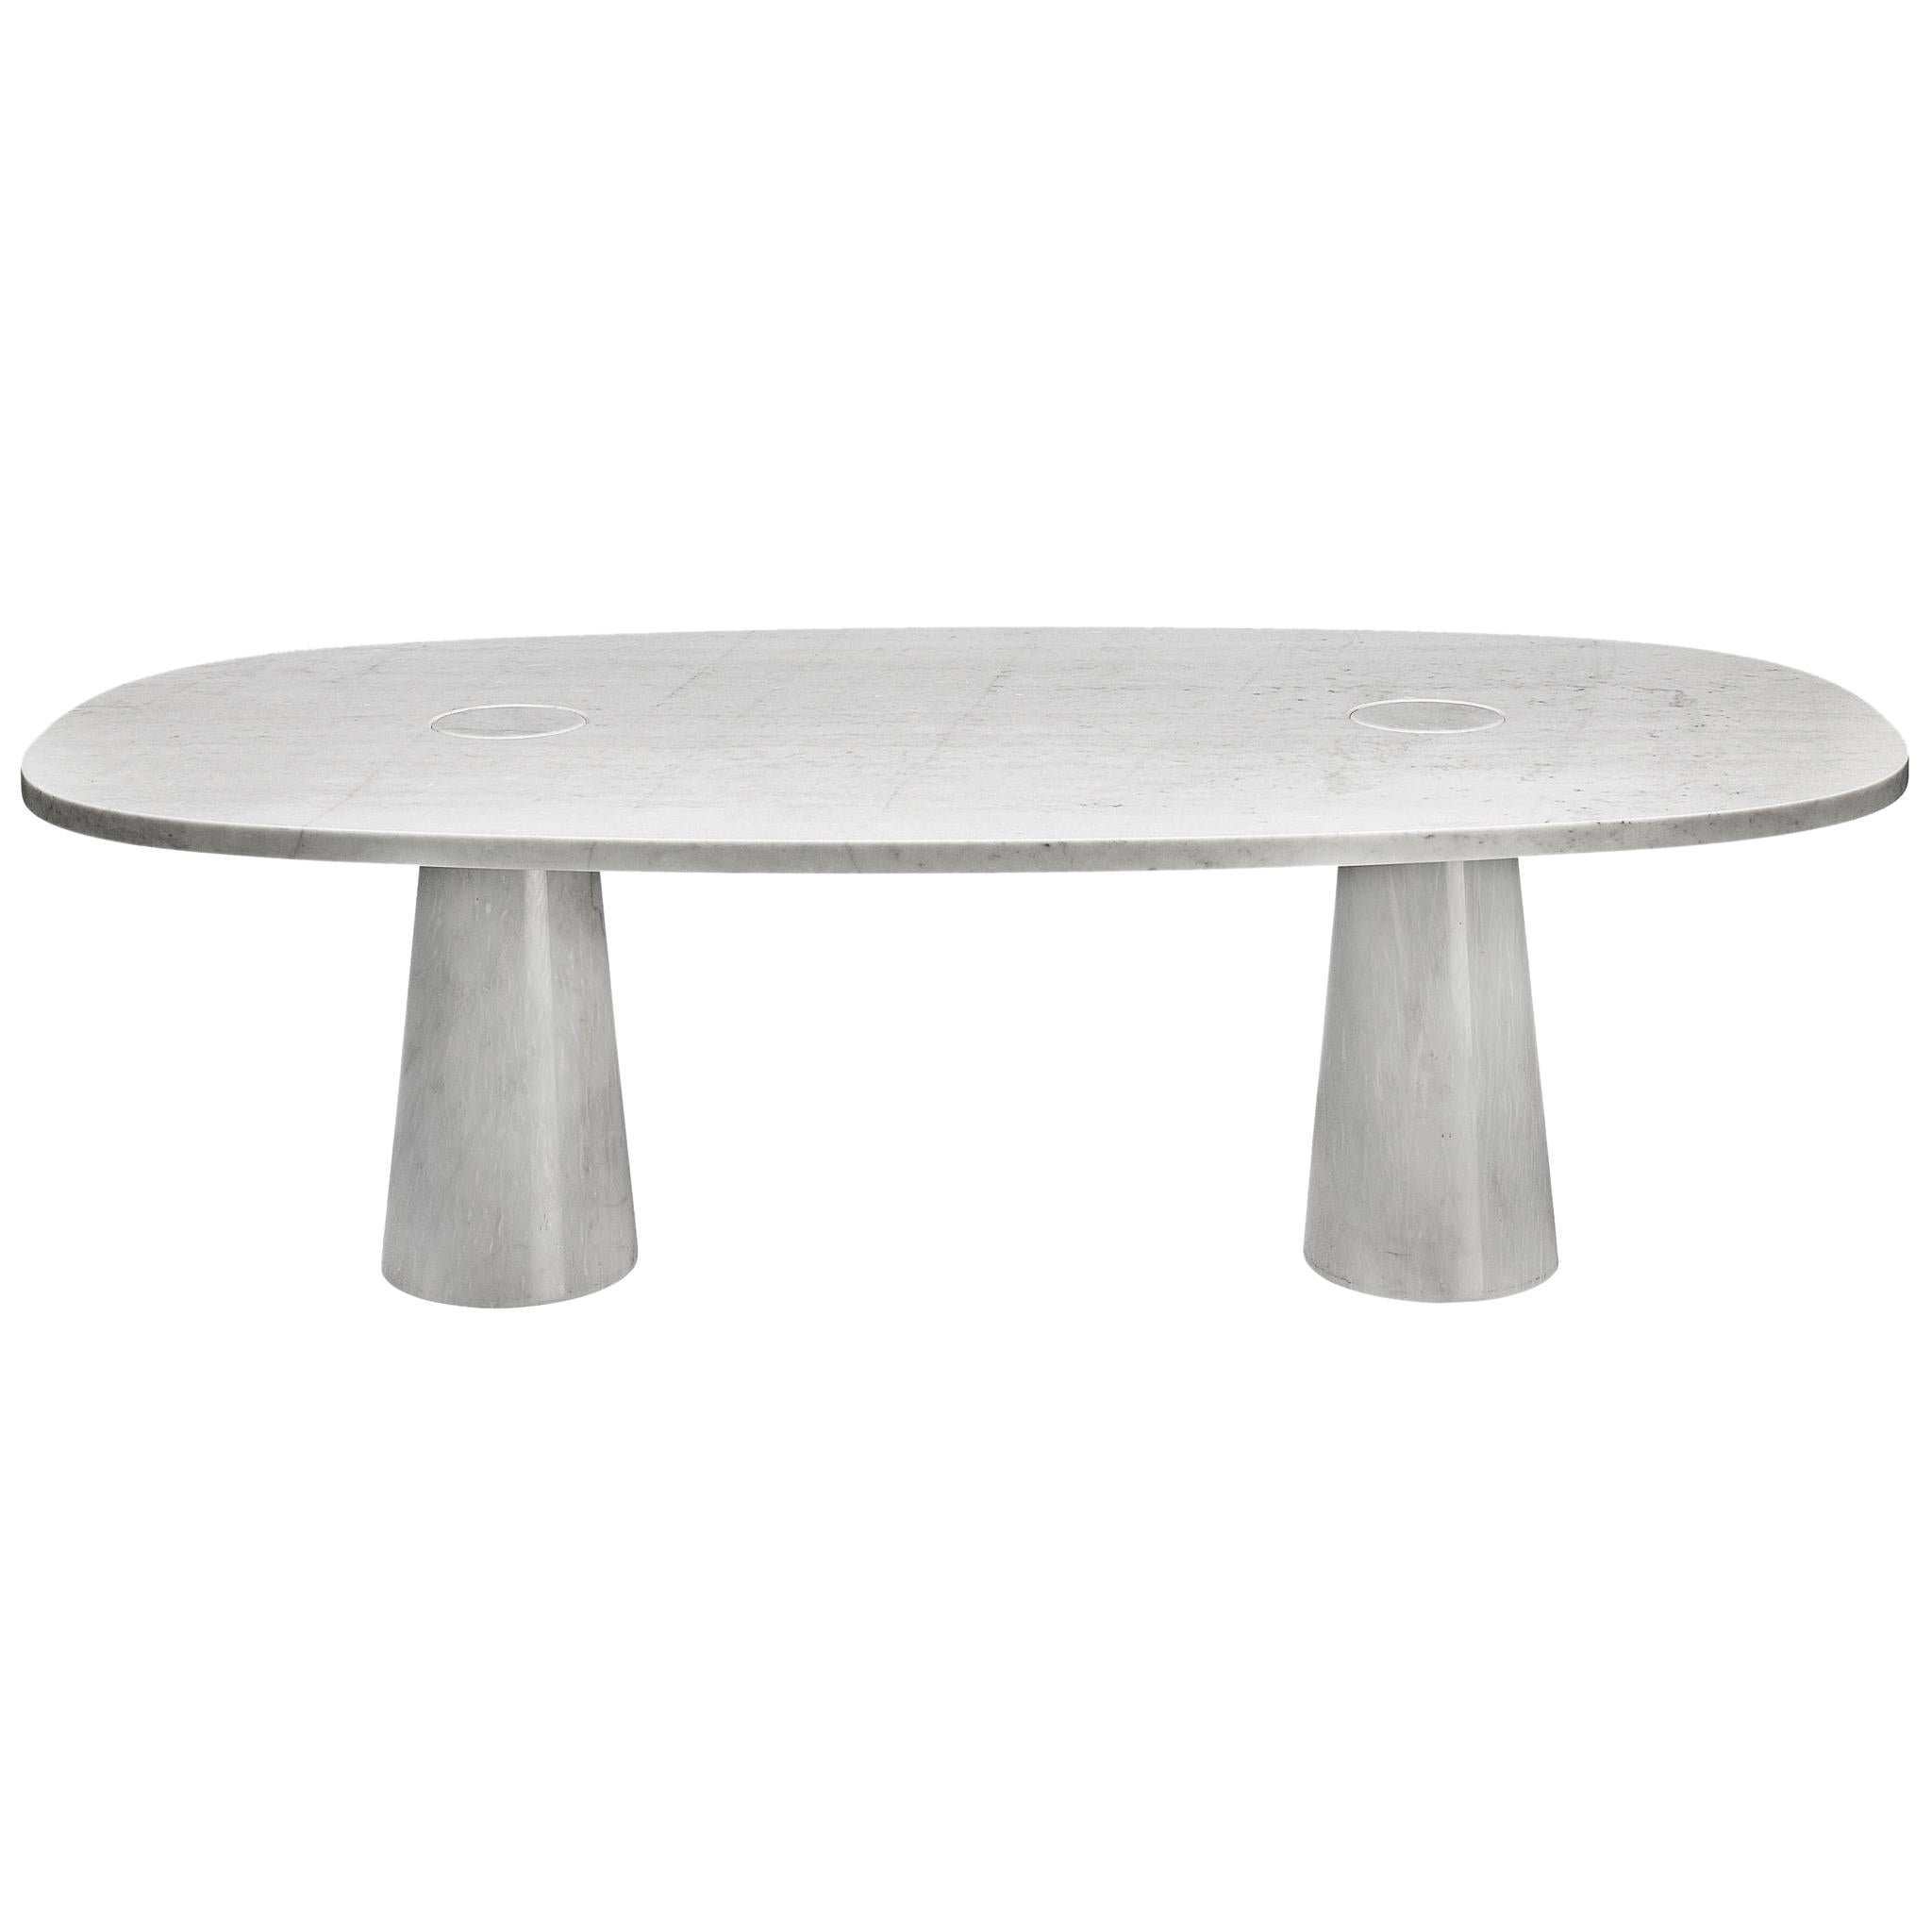 Angelo Mangiarotti 'Eros' Oval Dining Table in White Marble